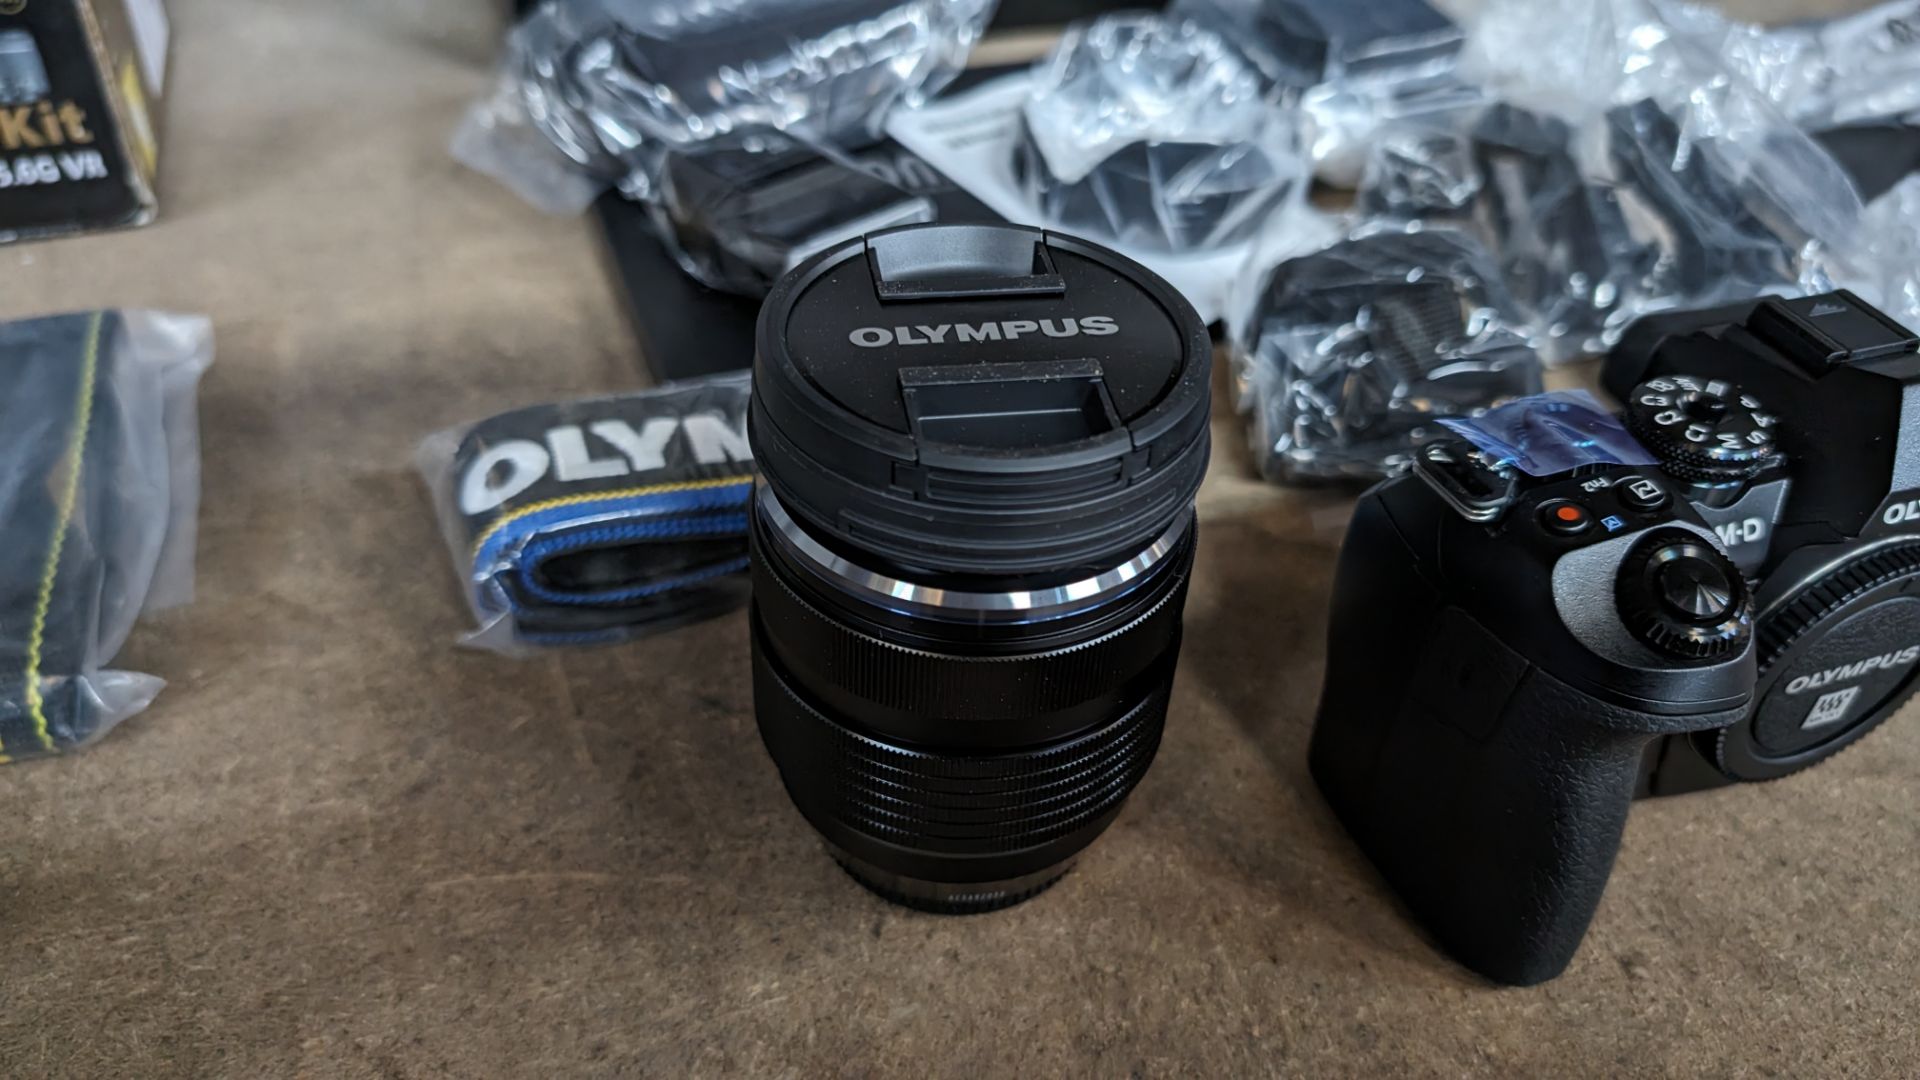 Olympus OM-D E-M1 Mark II micro camera kit, including camera body, strap, battery, charger, USB cabl - Image 6 of 15